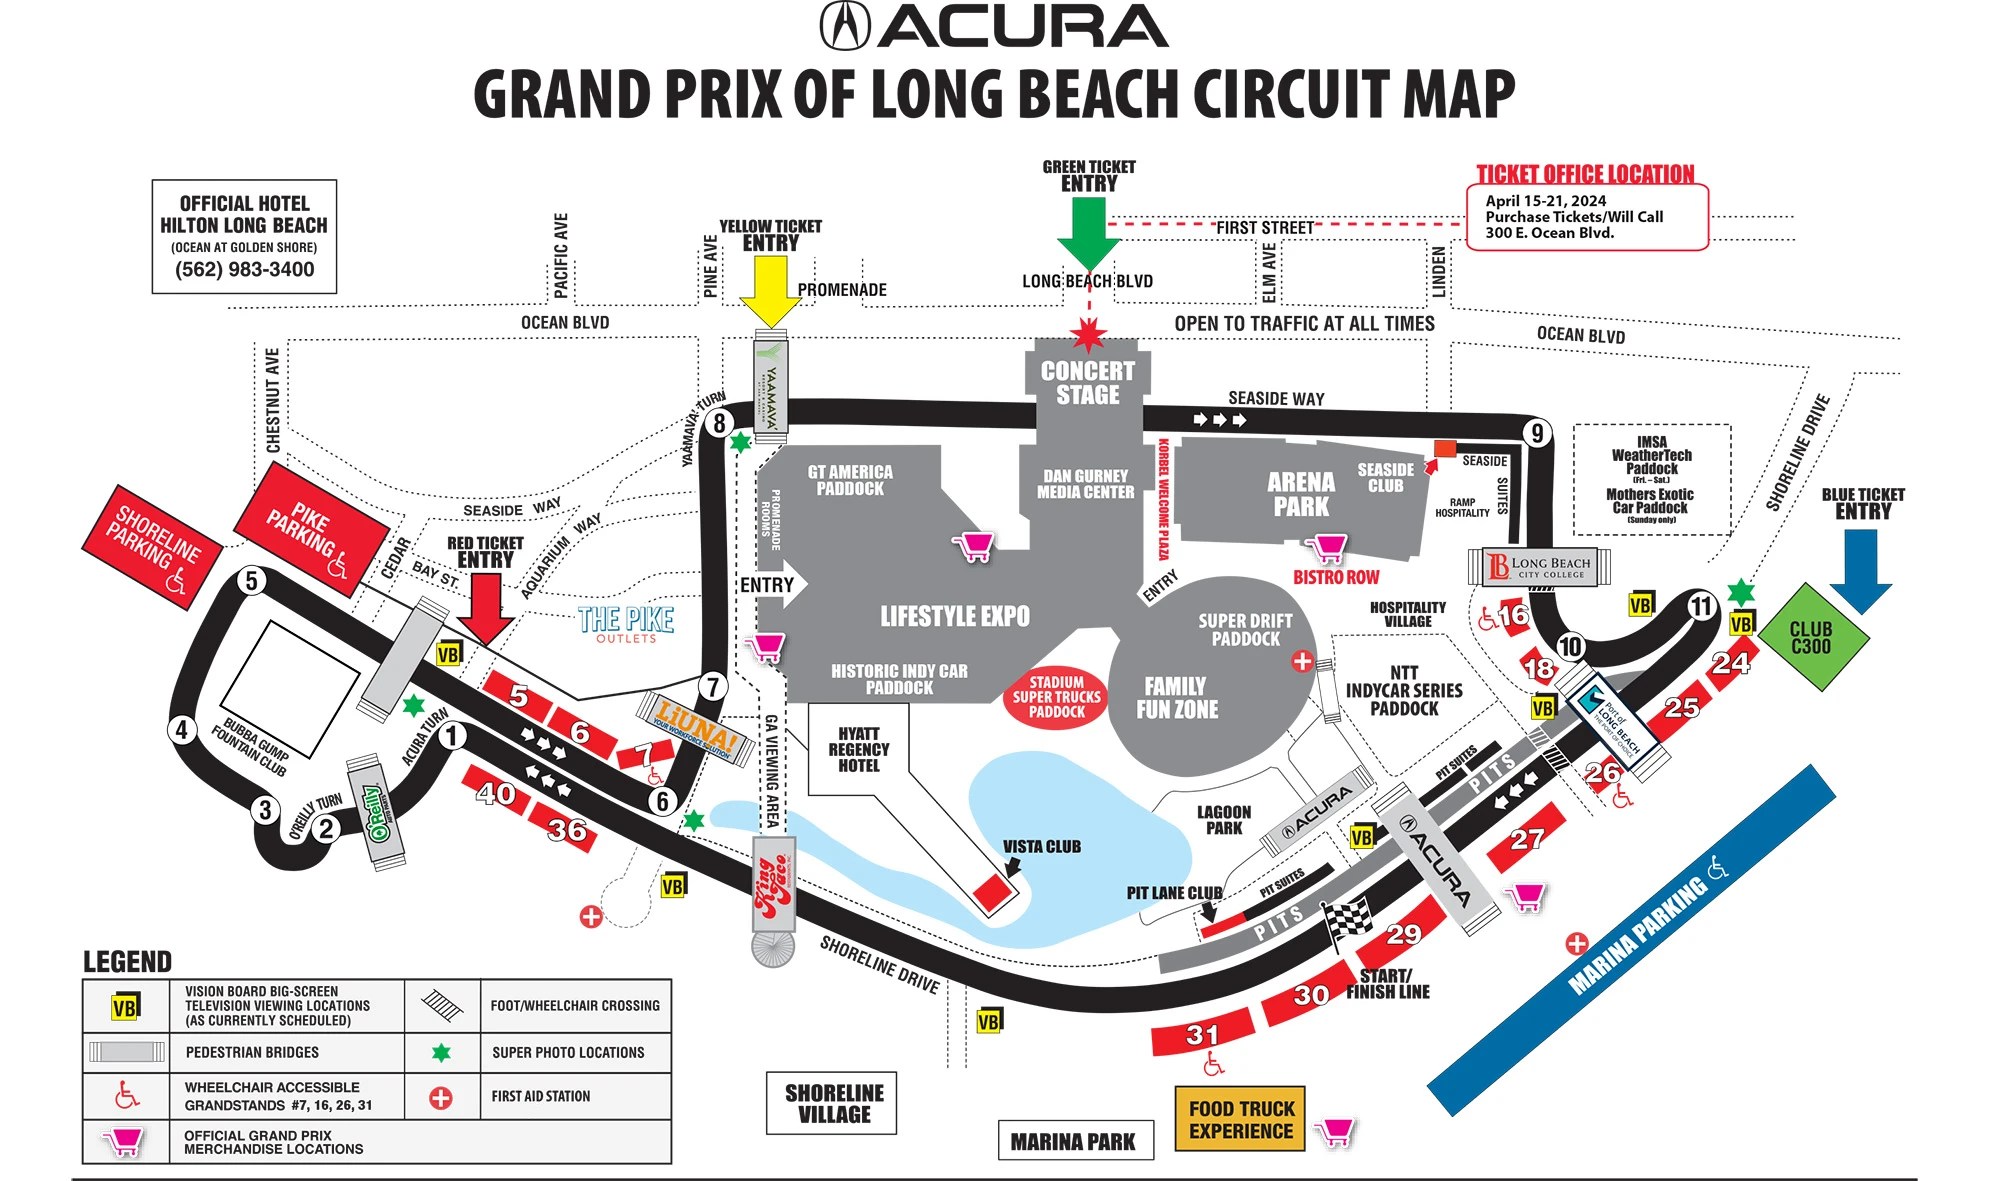 A map of the Grand Prix of Long Beach circuit.